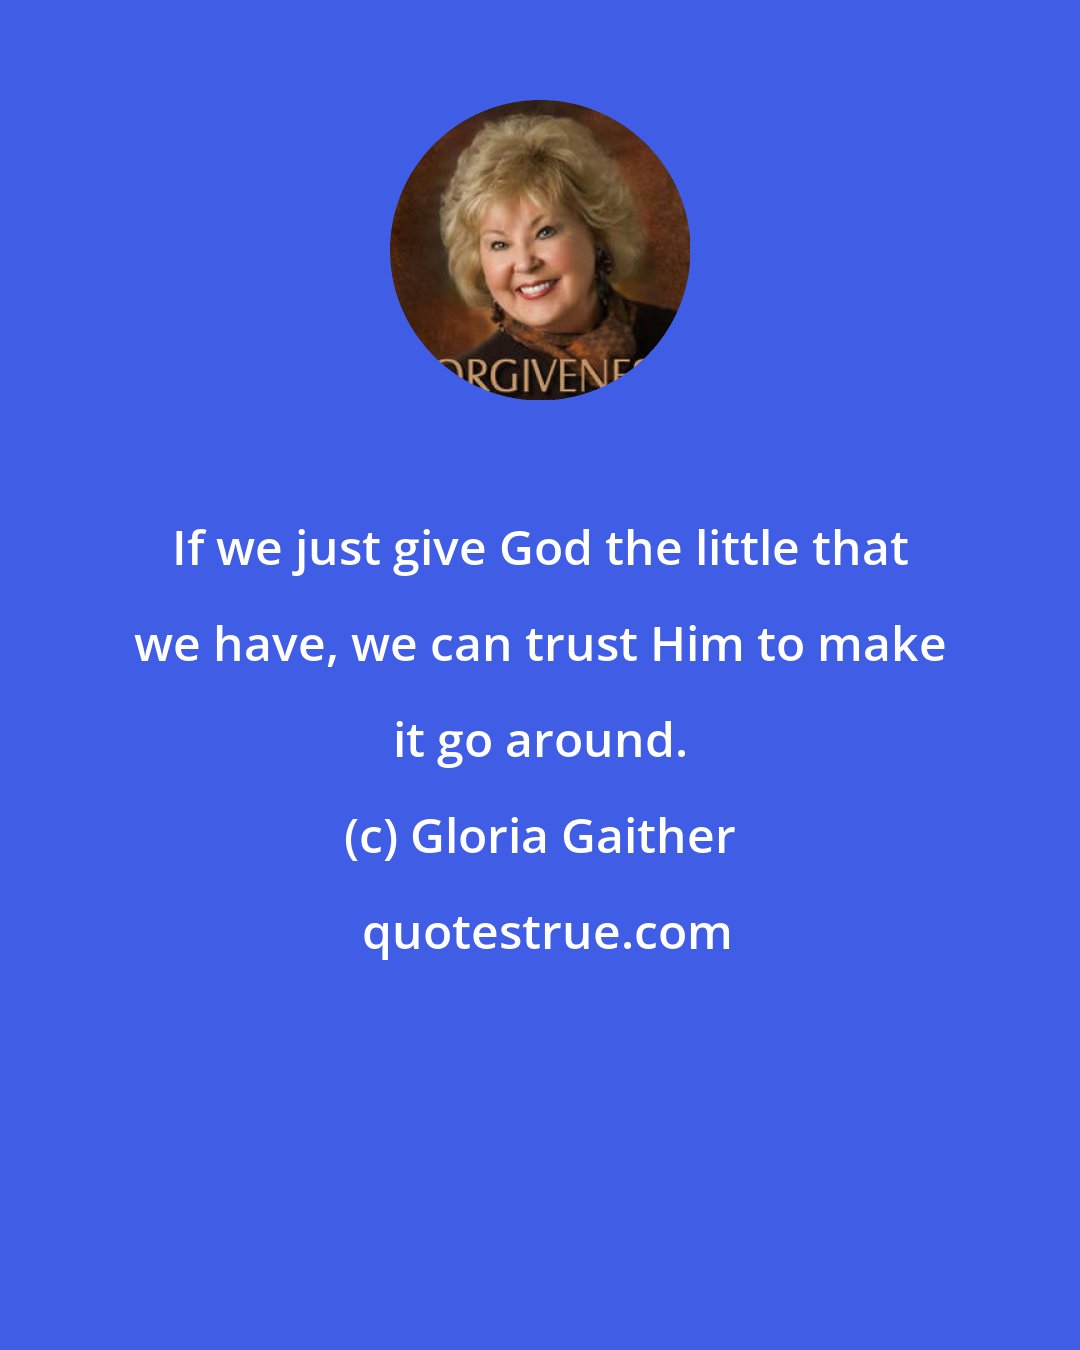 Gloria Gaither: If we just give God the little that we have, we can trust Him to make it go around.